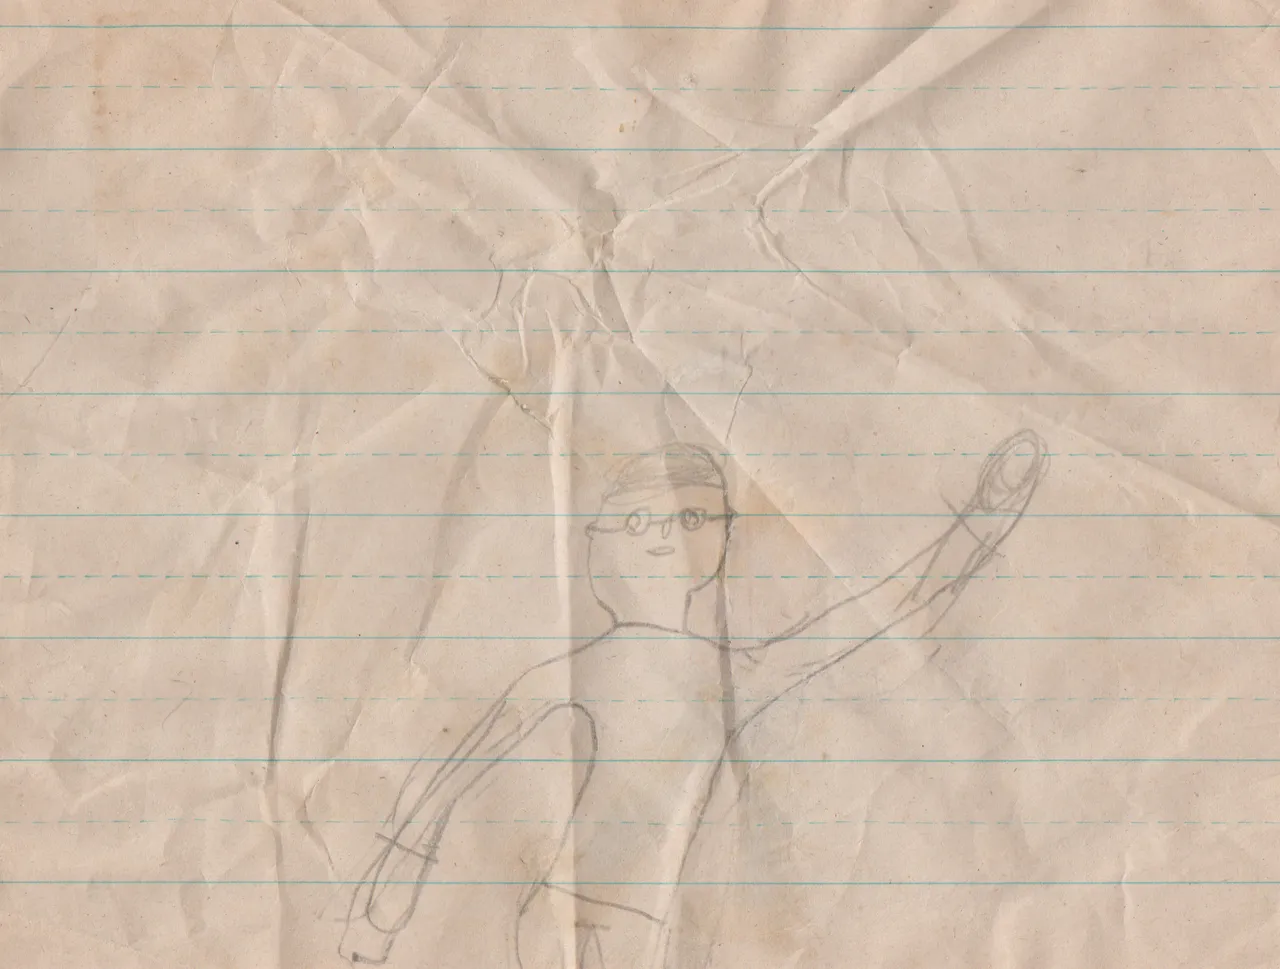 1990s - Joey Arnold drawing himself waving, maybe 1995, not sure when-2.png